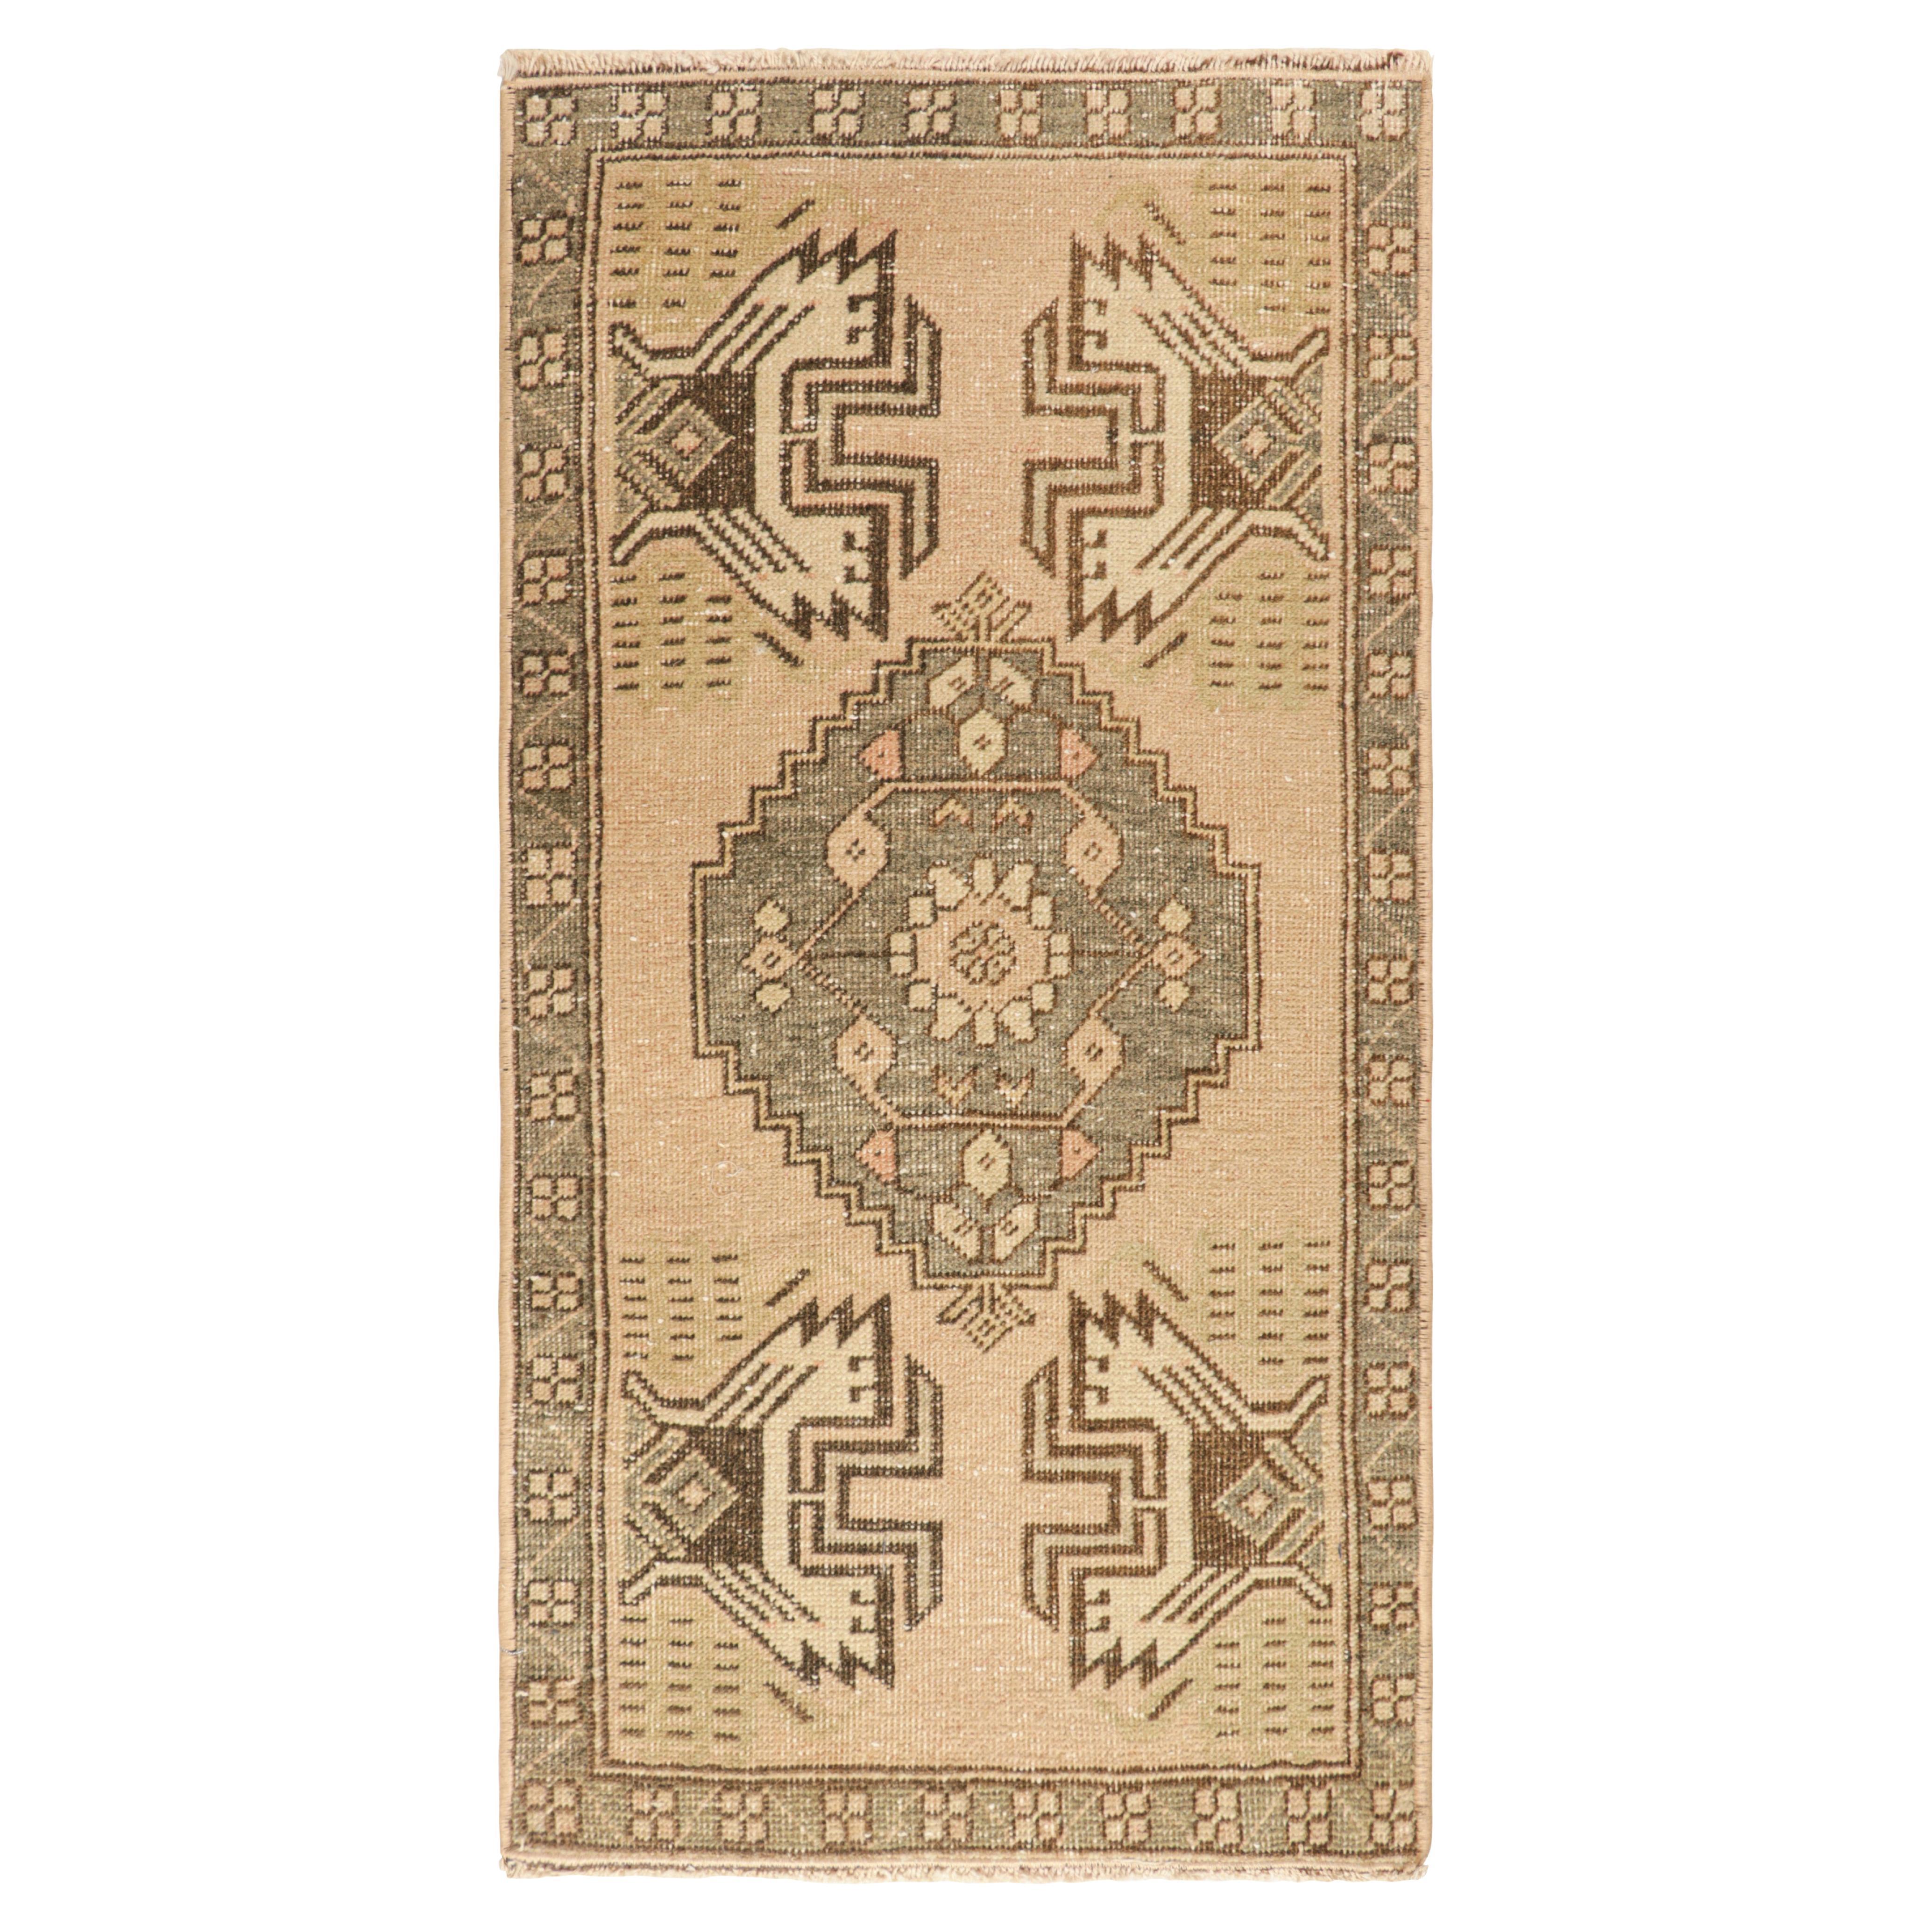 Vintage Oushak Rug in Beige-Brown, with Geometric Medallion, from Rug & Kilim For Sale